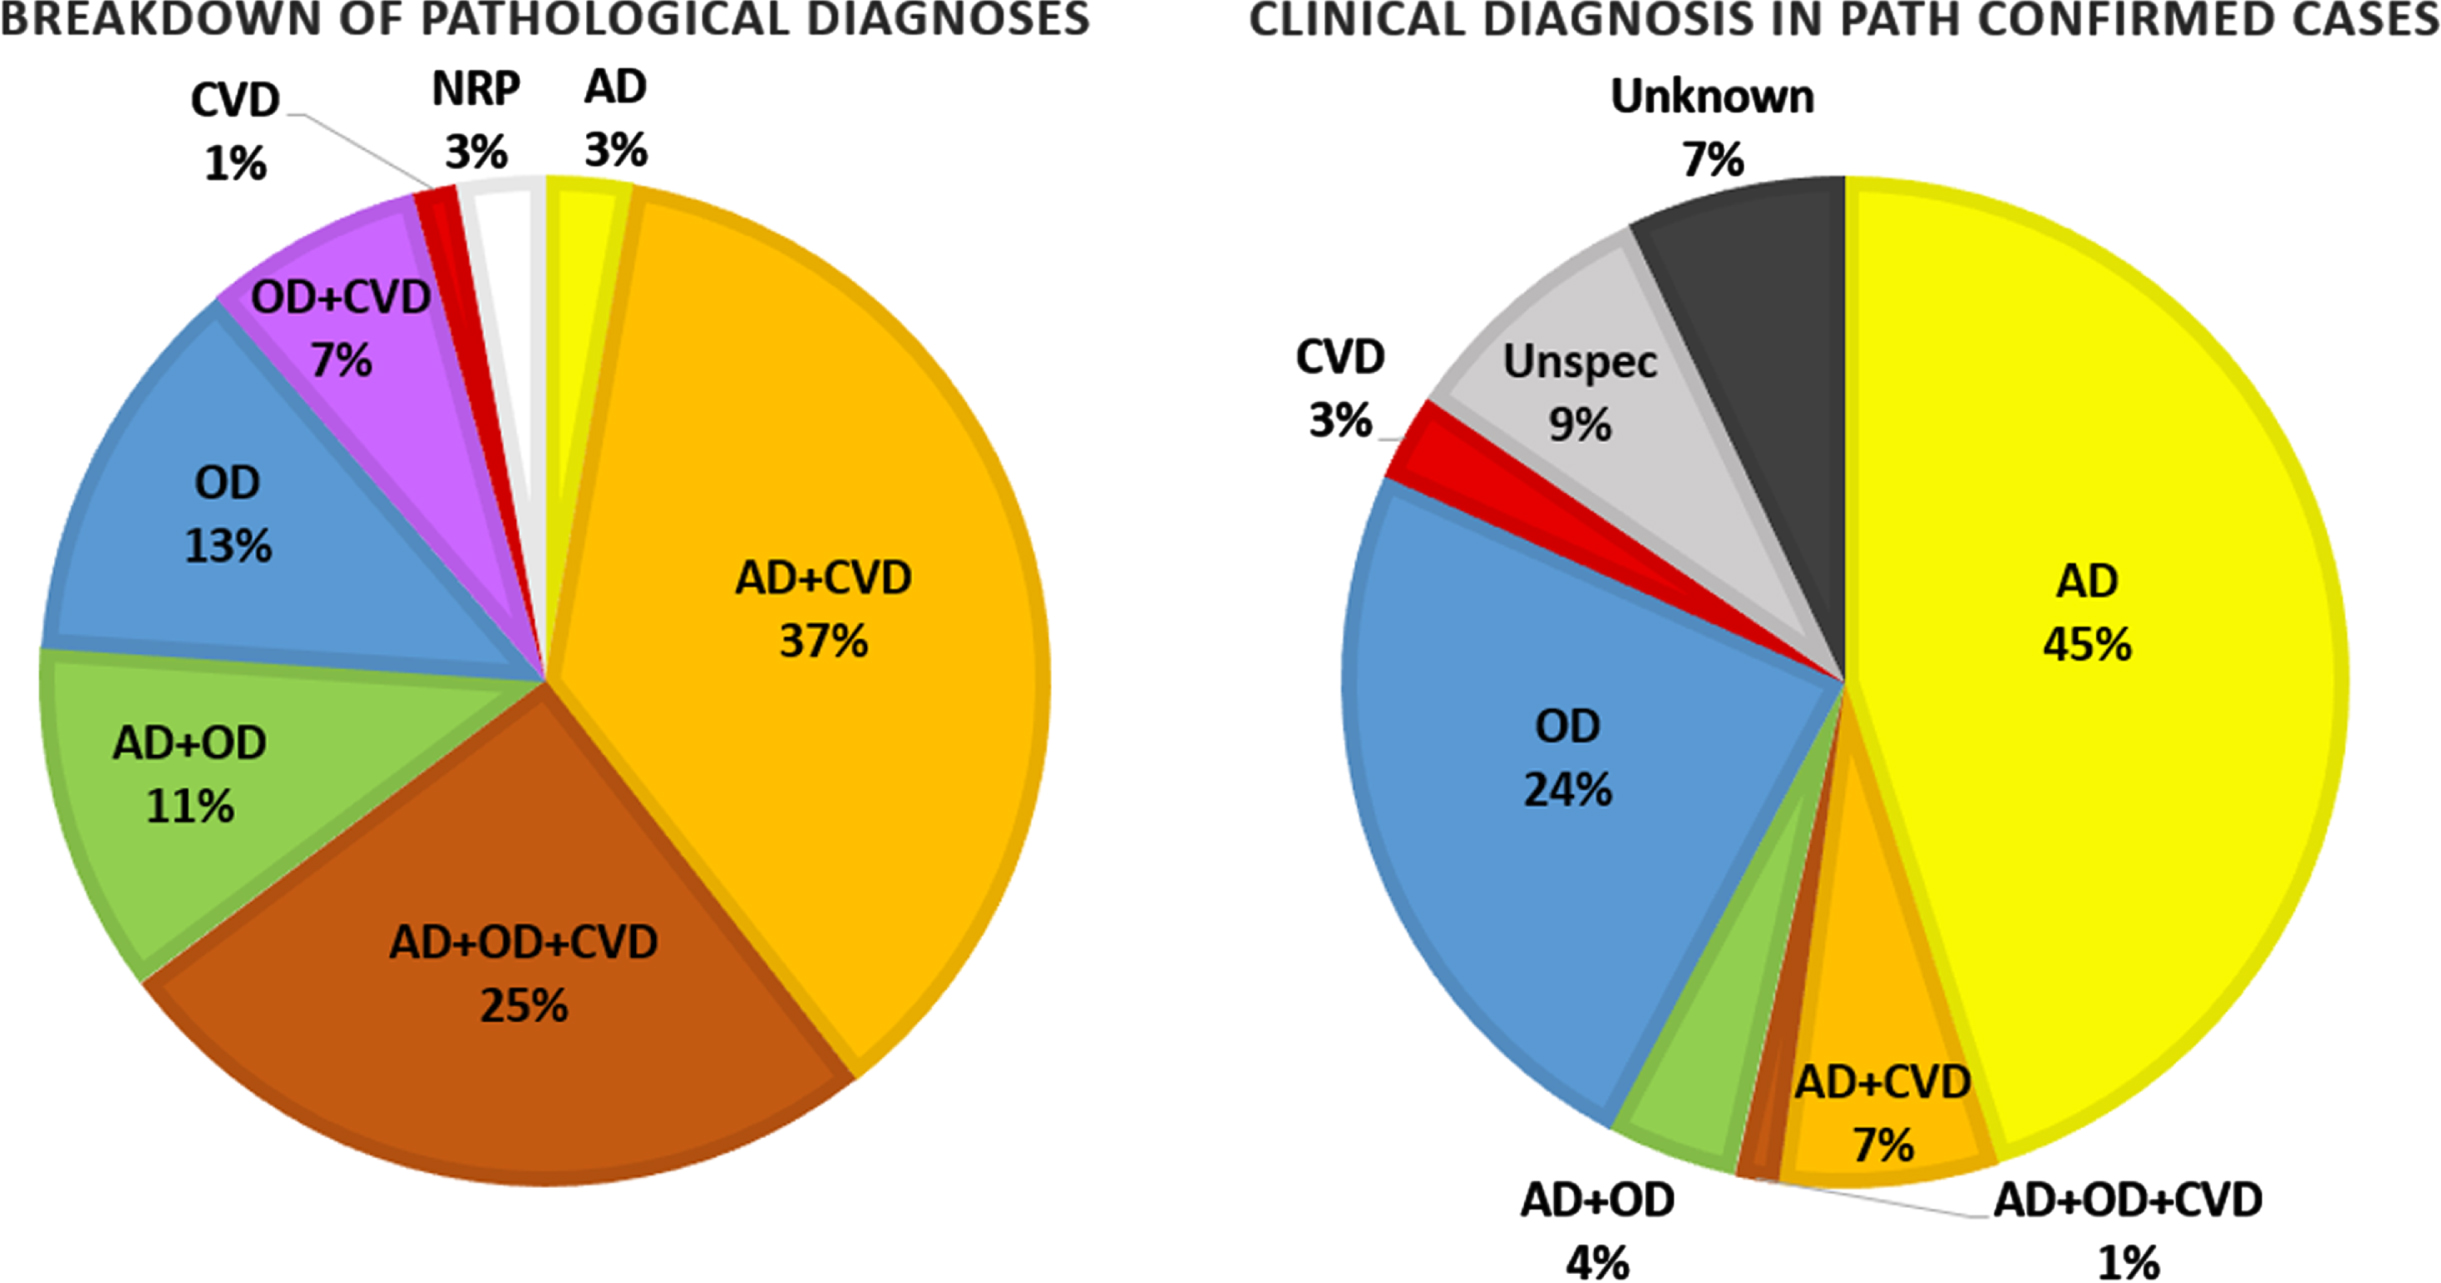 Breakdown of neurodegenerative pathologies found in 71 fully analyzed cases and the corresponding breakdown of their clinical diagnoses. AD, Alzheimer’s disease; CVD, cerebrovascular disease; OD, other (non-AD/CVD) dementia; NRP, no relevant pathology.